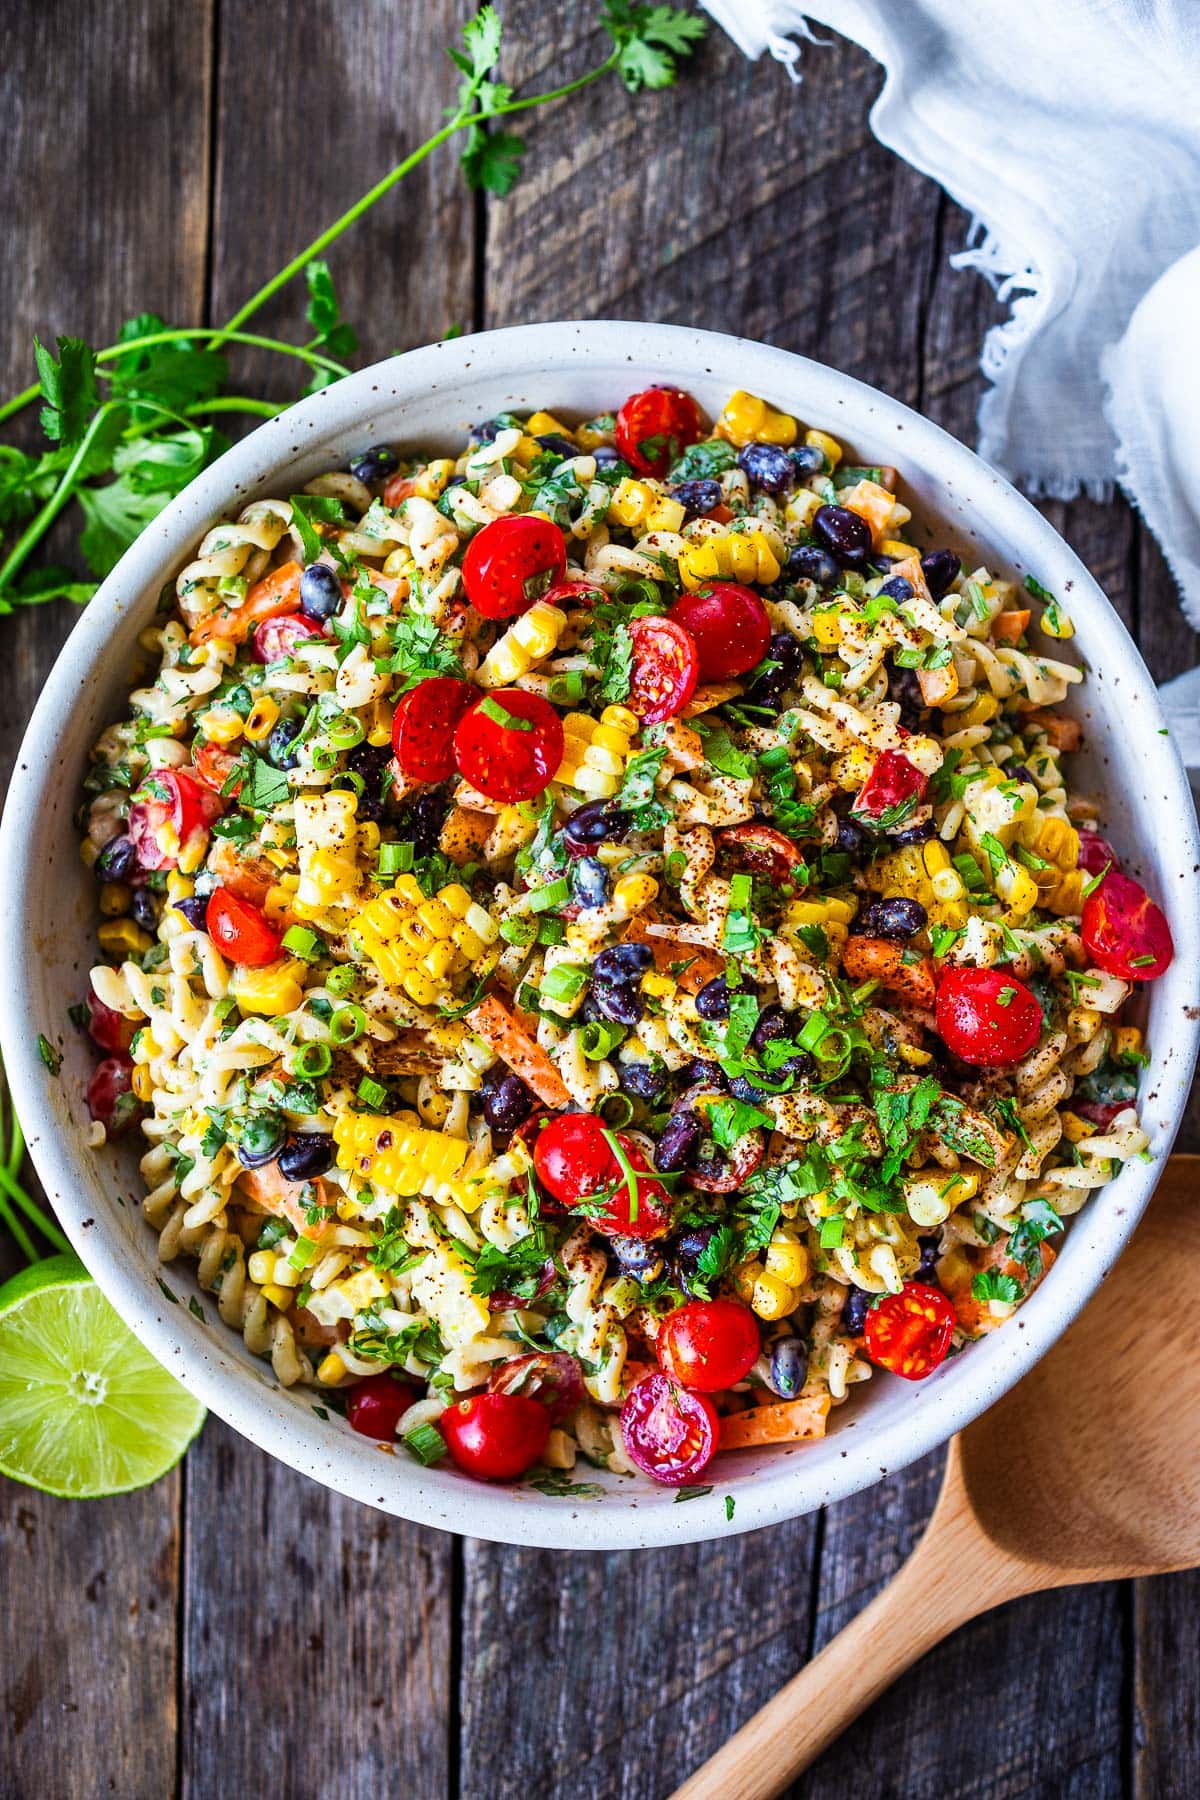 Southwest Pasta Salad is so satisfying with just the right amount of zesty kick. Tender pasta, crunchy fresh veggies, corn, and black beans dressed with a delicious Chipotle Ranch Dressing. The perfect side dish for potlucks, cookouts, and BBQS.